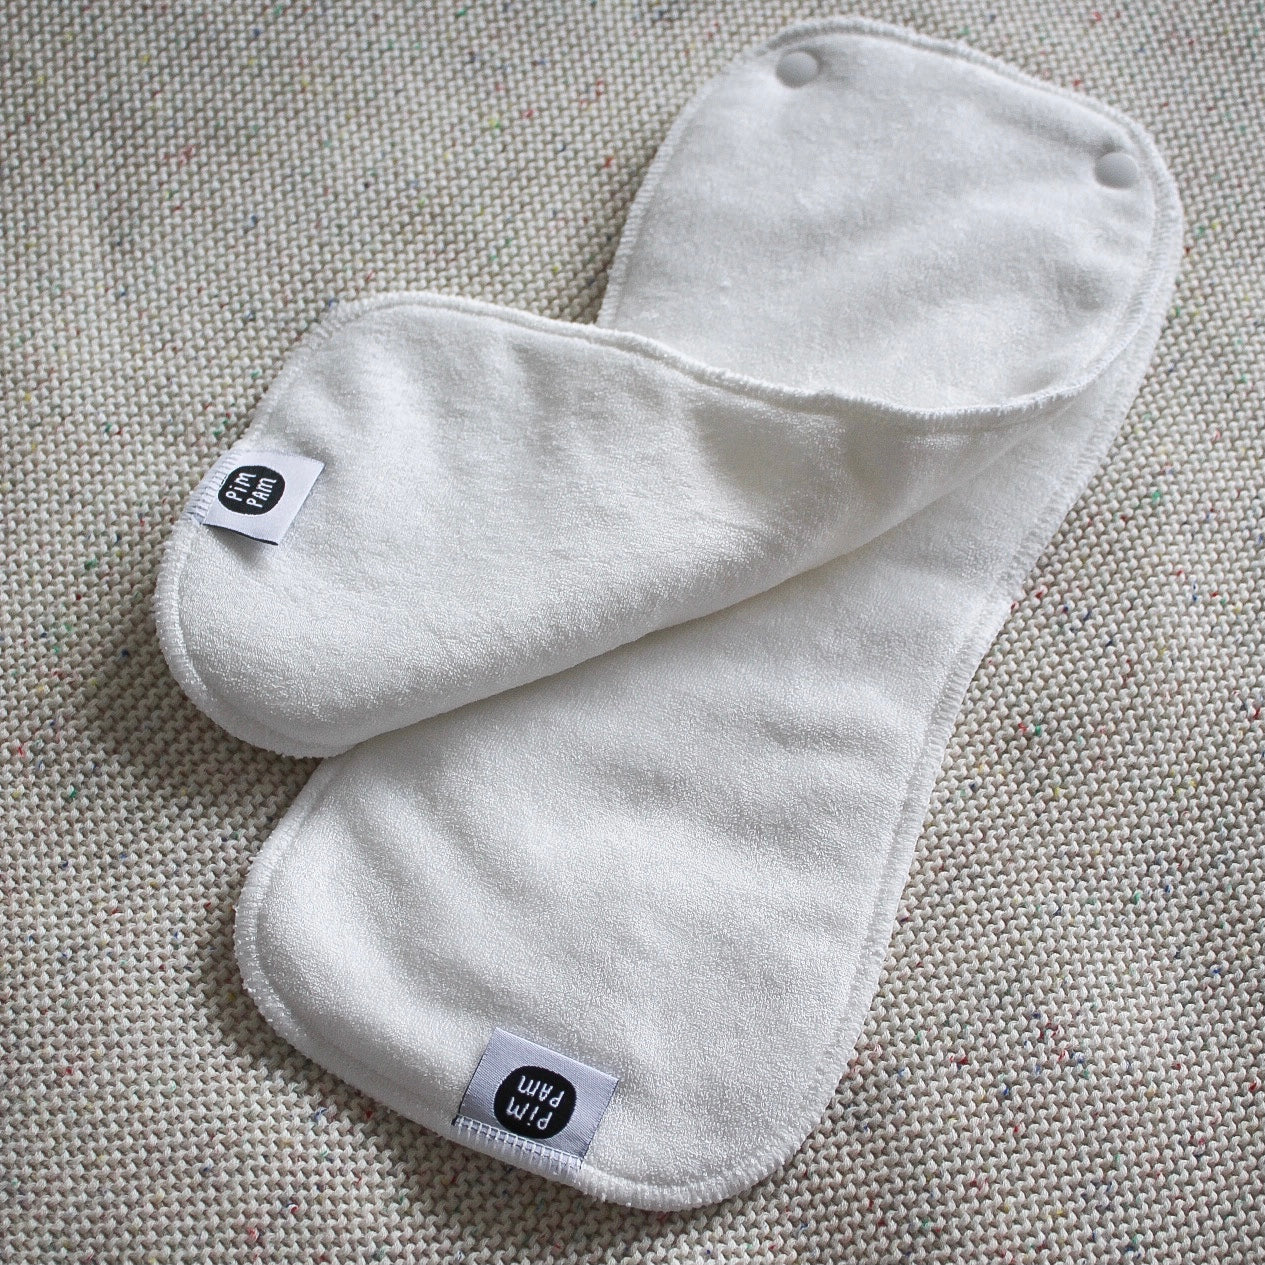 REUSABLE POCKET NAPPY | TOFFEE